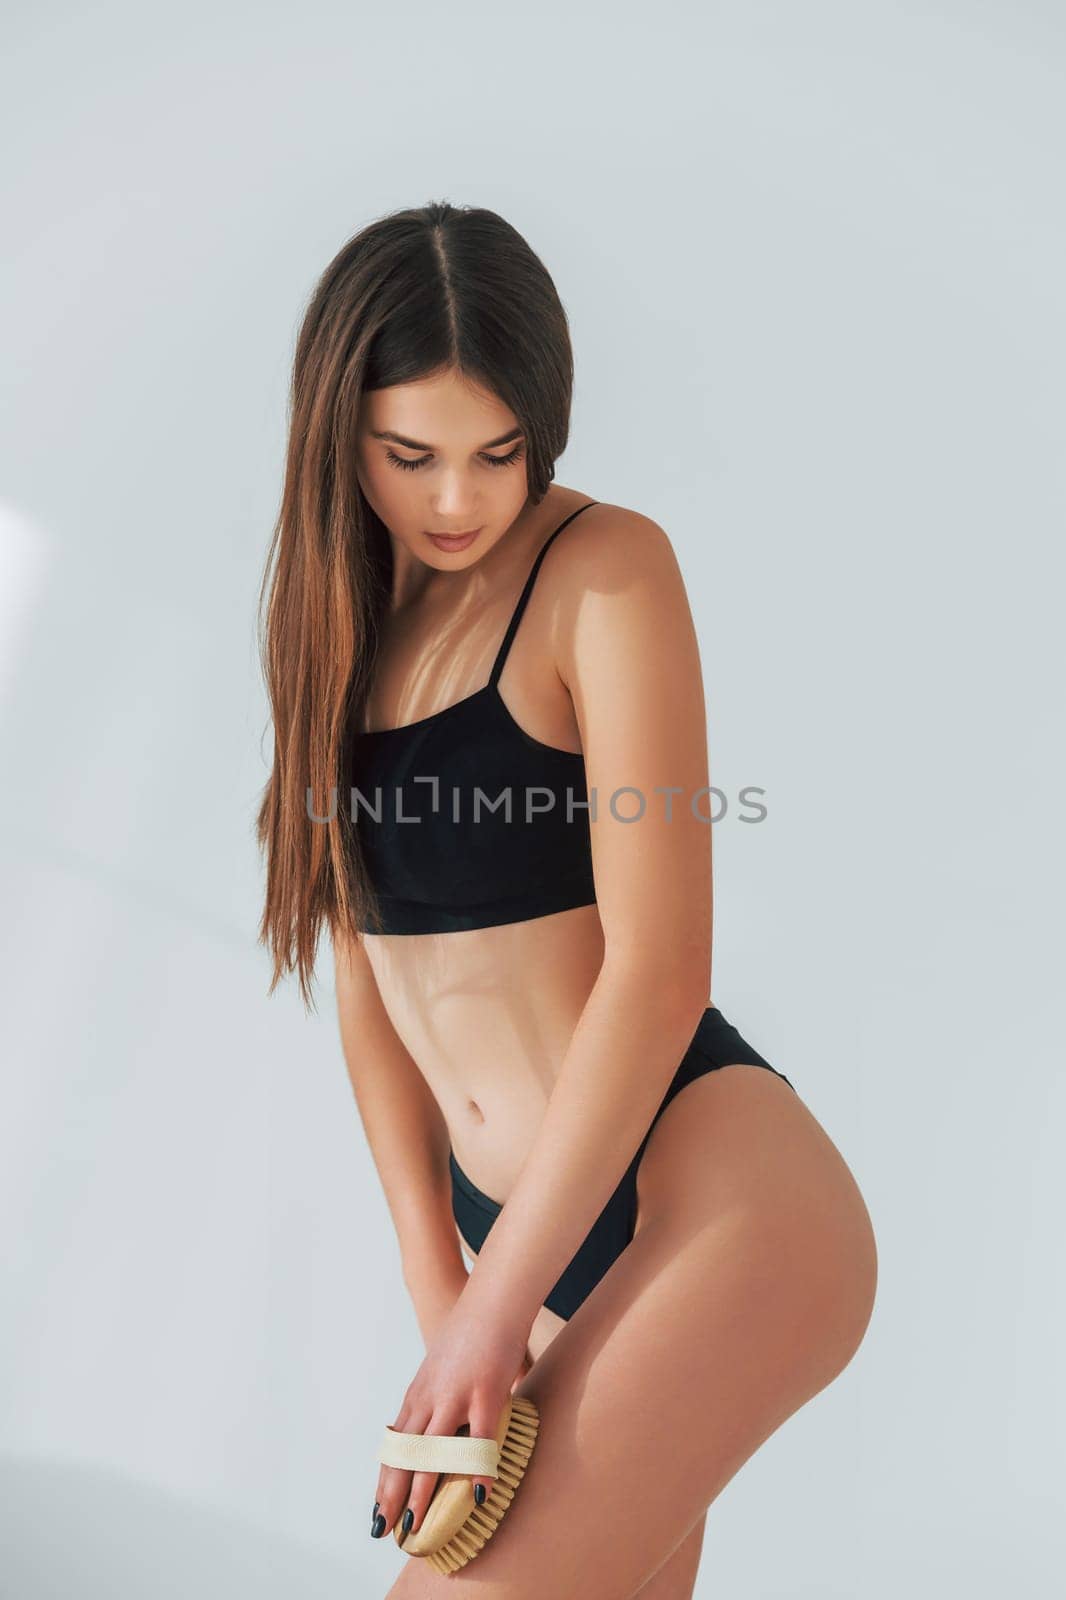 Standing against white background. Beautiful woman in underwear is posing indoors.